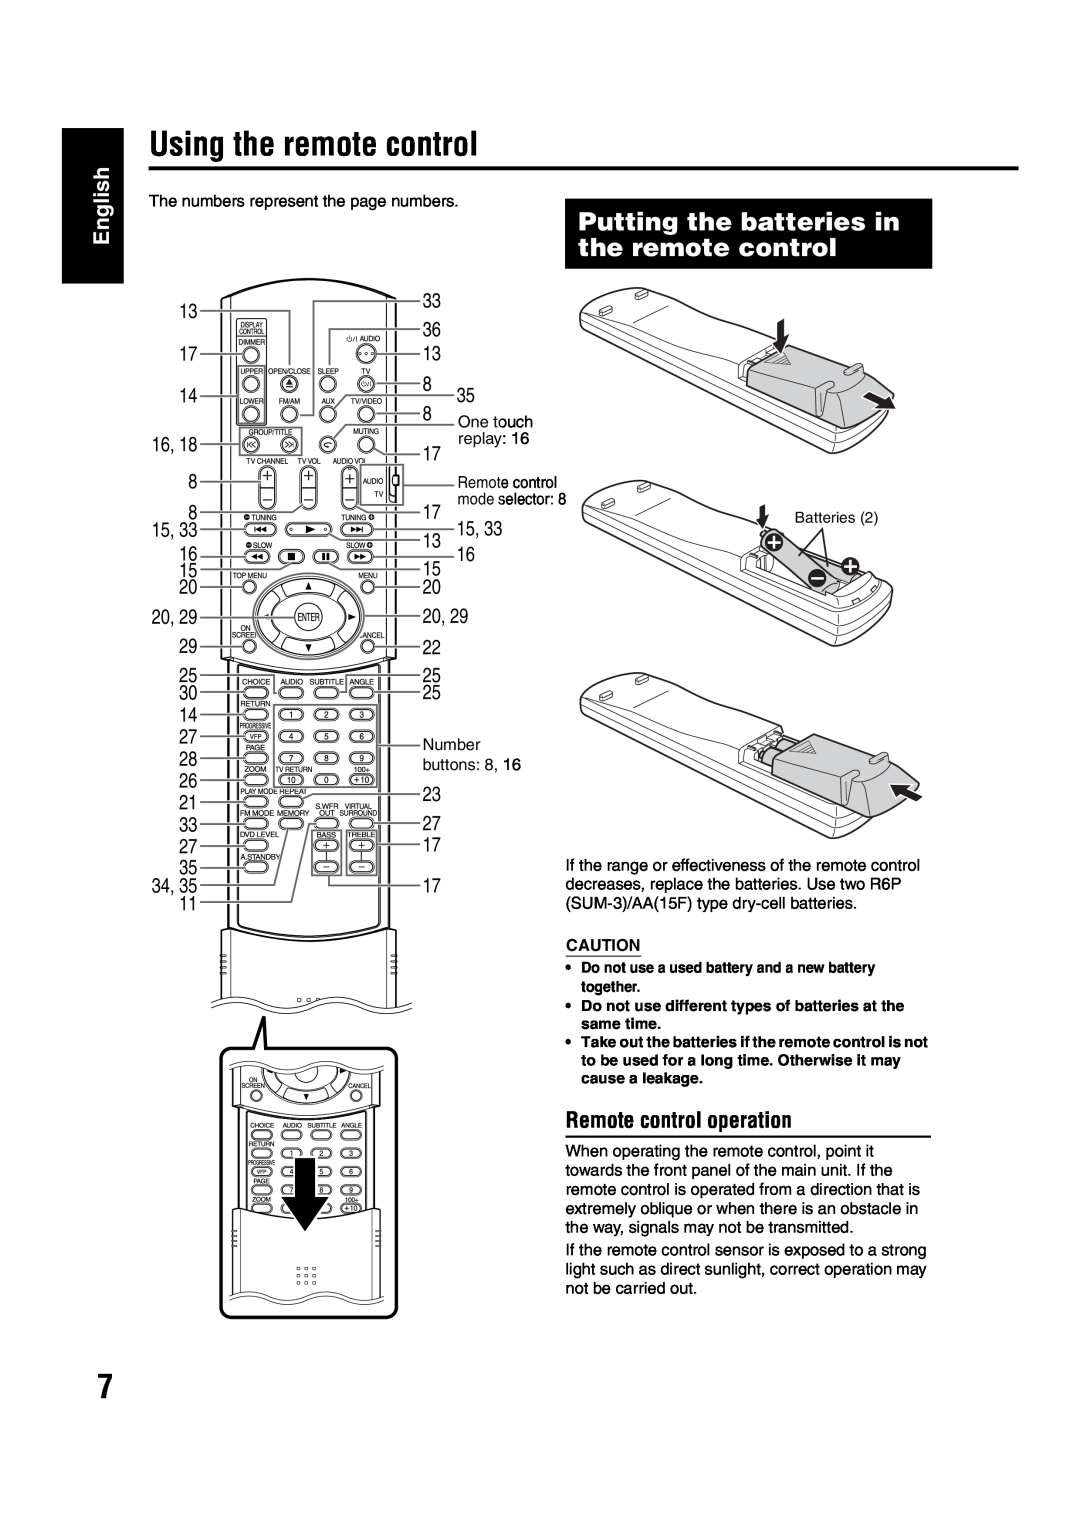 JVC EX-A1 manual Using the remote control, Putting the batteries in, English, Remote control operation 